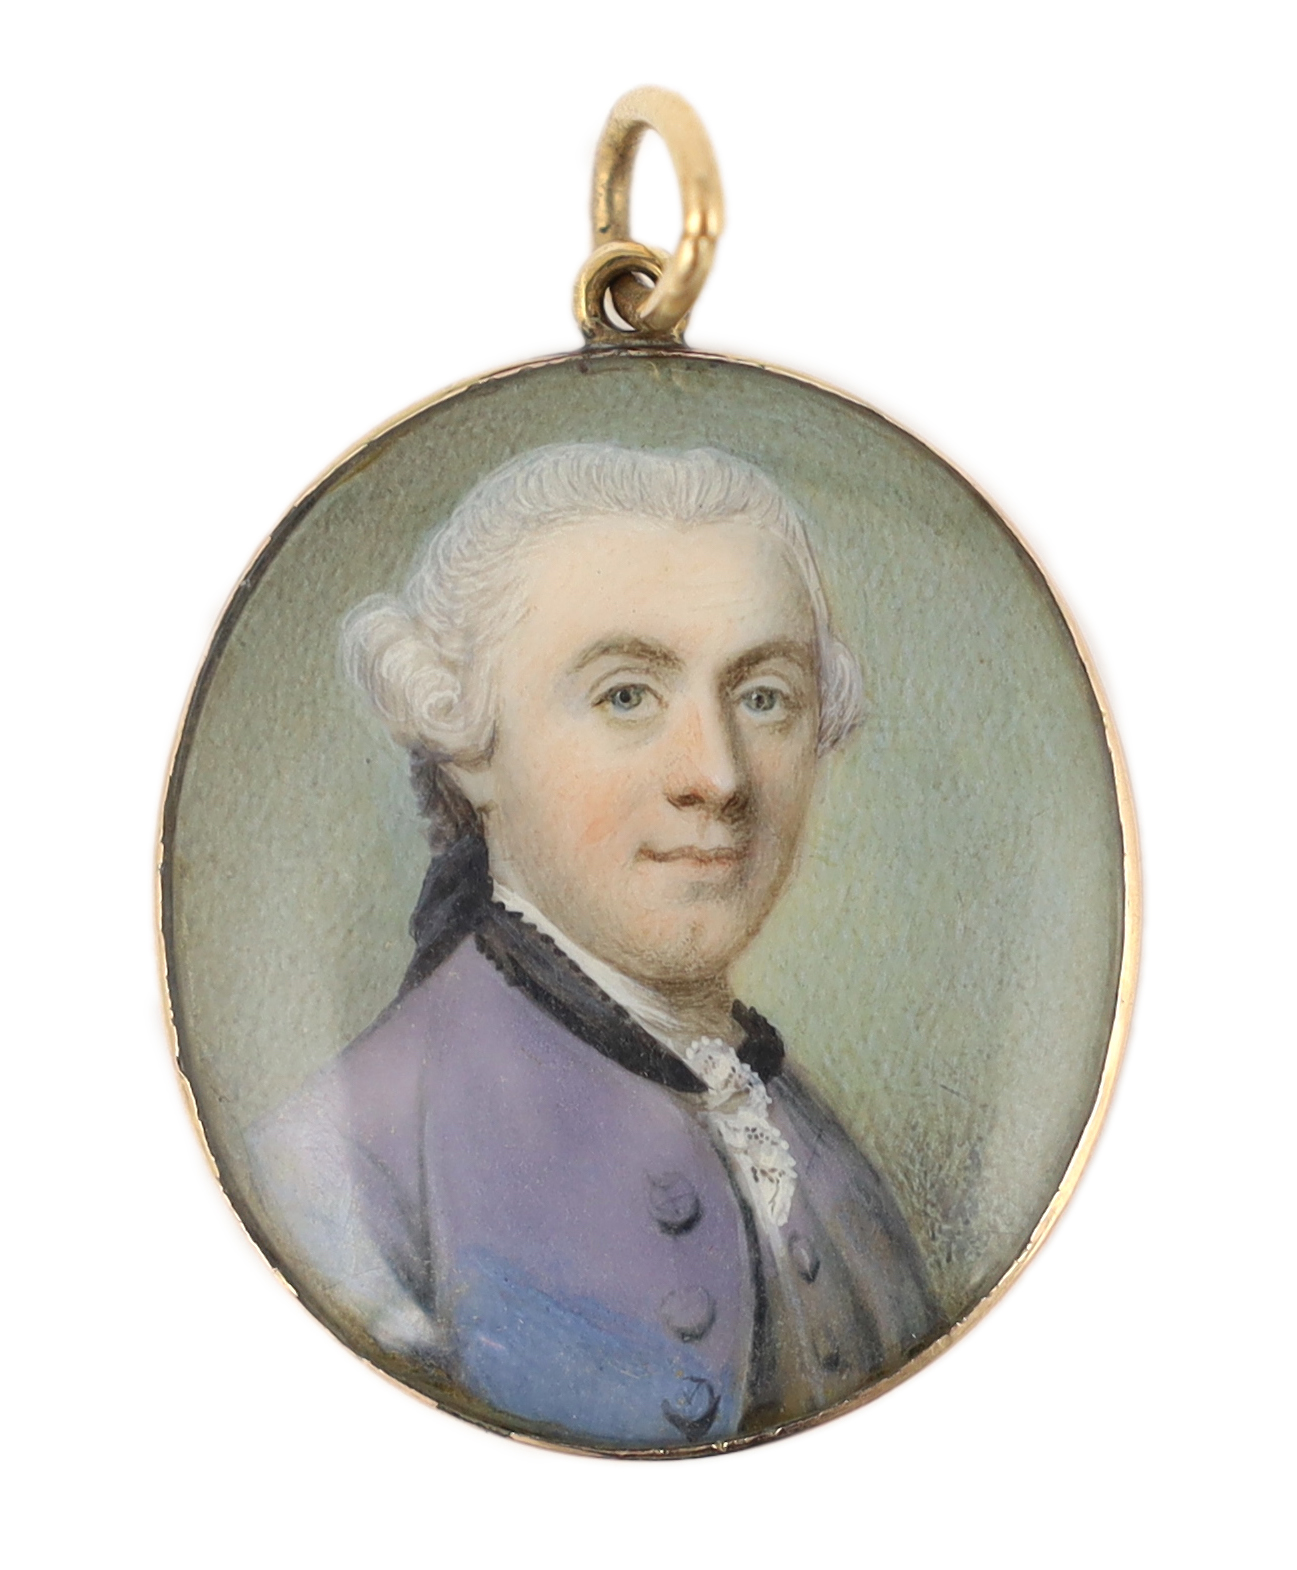 Jeremiah Meyer, R.A. (Anglo-German, 1735-1789), Portrait miniature of a gentleman, watercolour on ivory, 3.2 x 2.7cm. CITES Submission reference 1ZSFSFH4